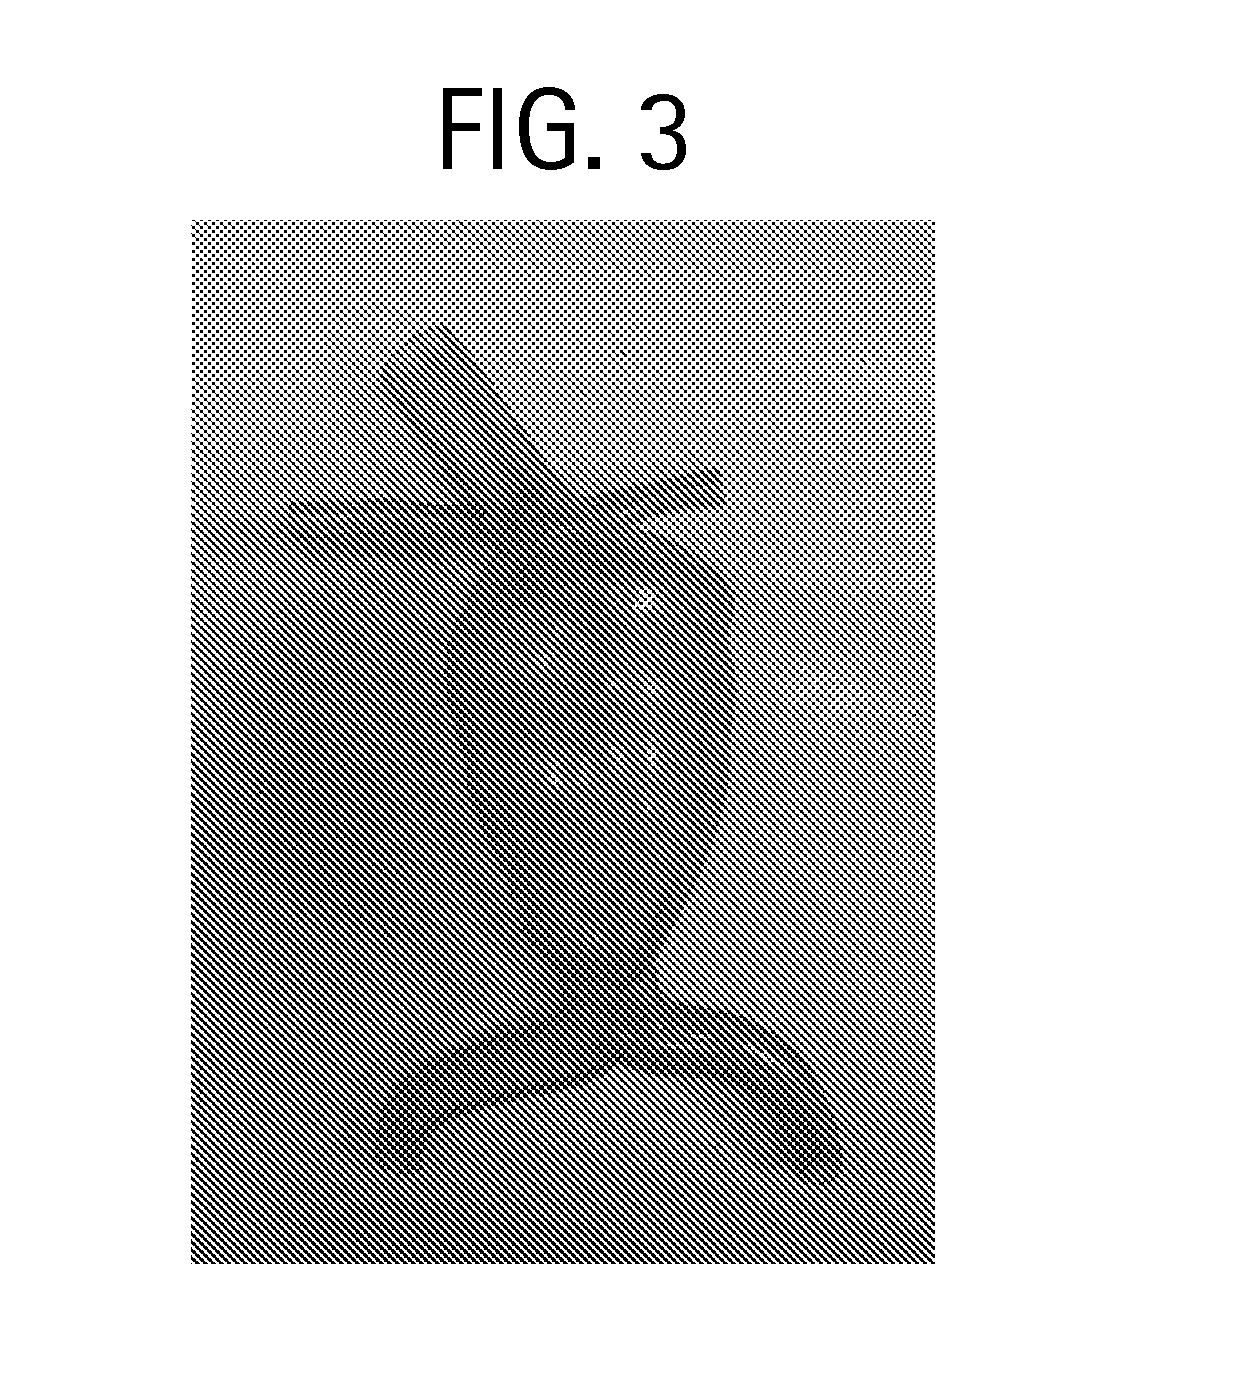 Anatomically compliant aaa model and the method of manufacture for in vitro simulated device testing